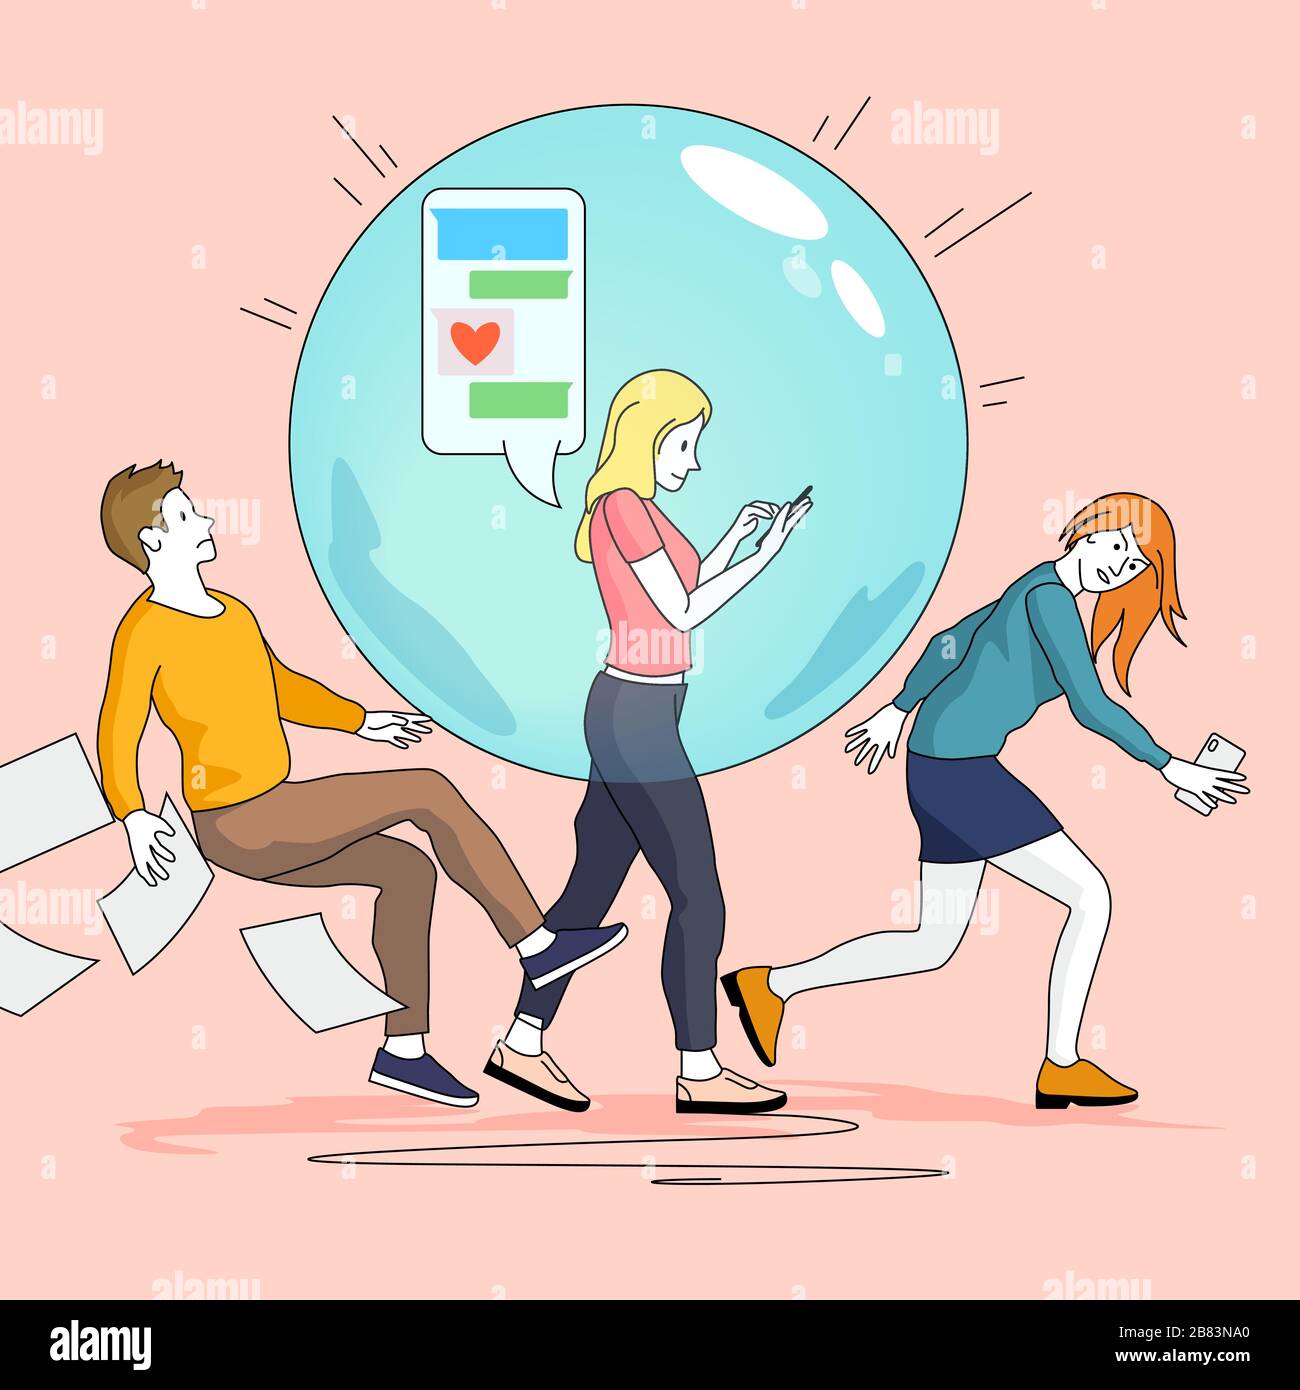 A young womens social bubble pushing and knocking other people out of the way. People concept vector illustration. Stock Vector